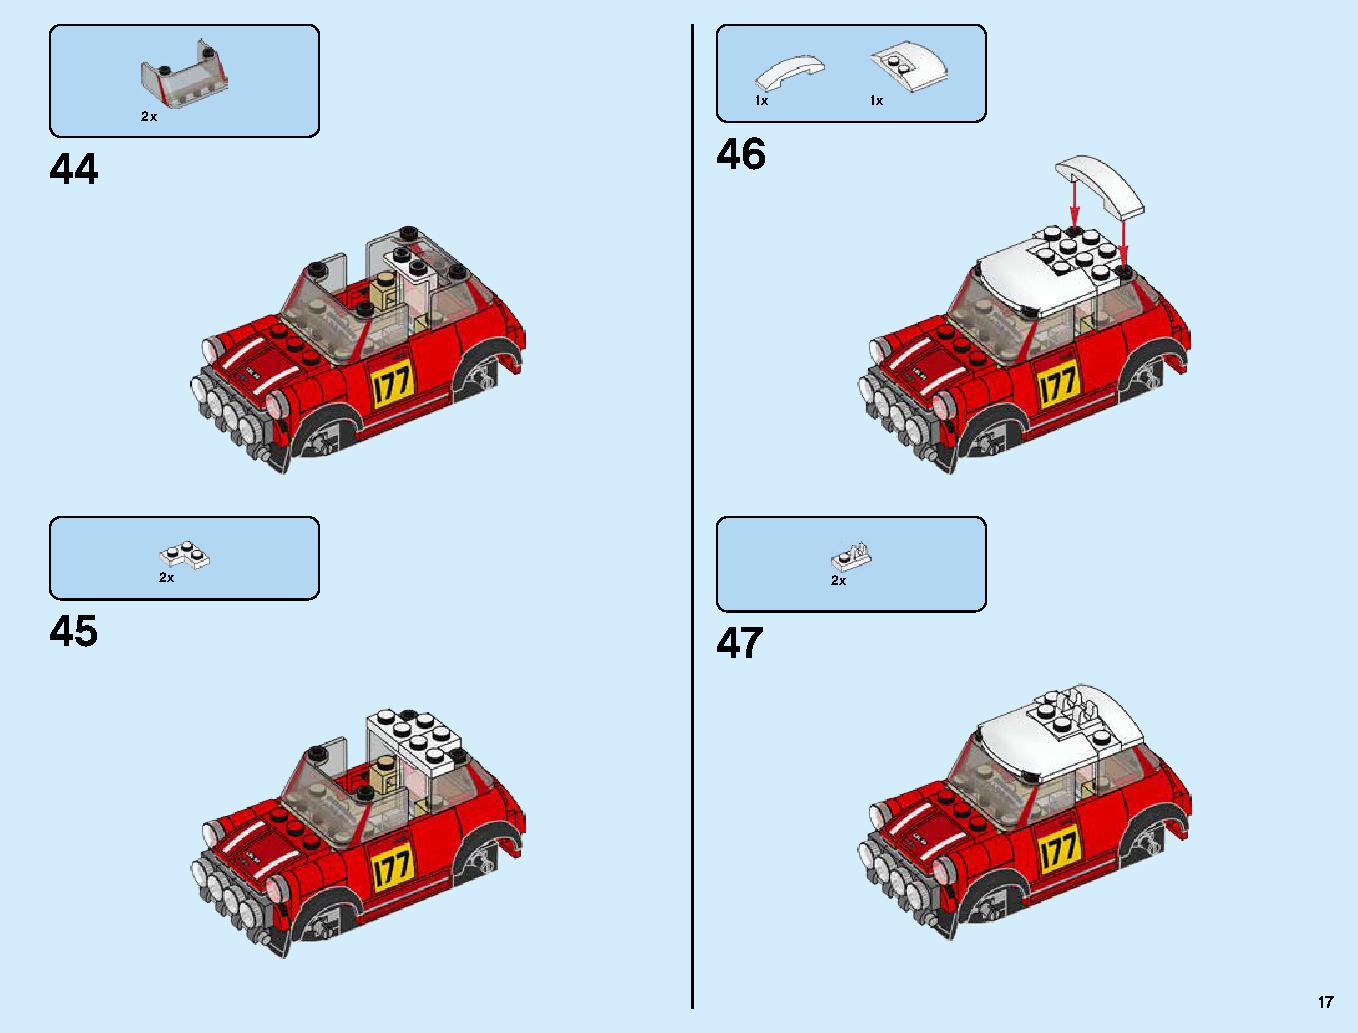 1967 Mini Cooper S Rally and 2018 MINI John Cooper Works Buggy 75894 LEGO information LEGO instructions 17 page